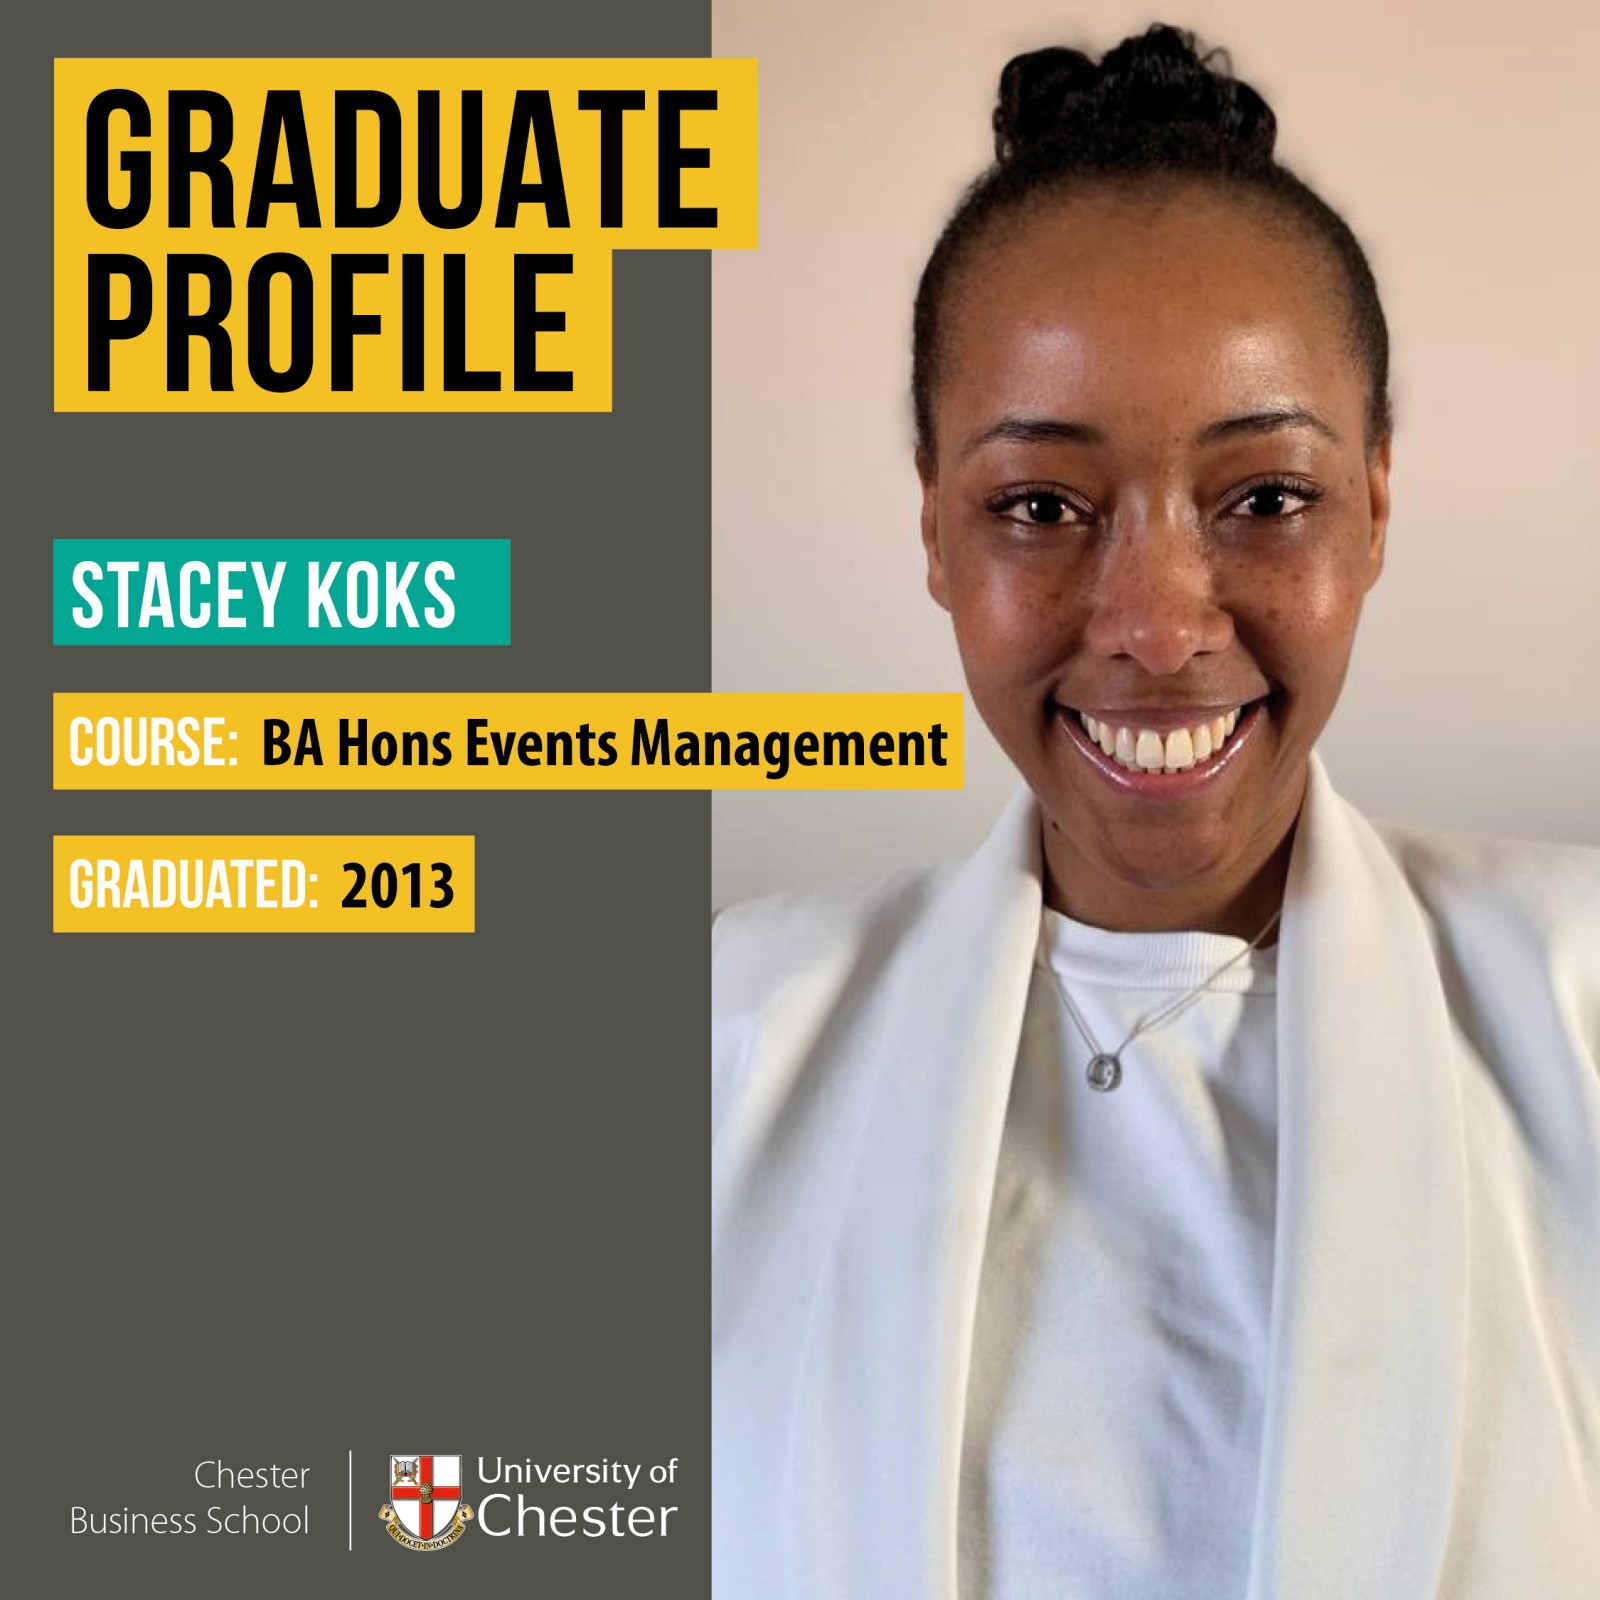 Profile picture of Events Management graduate Stacey Koks